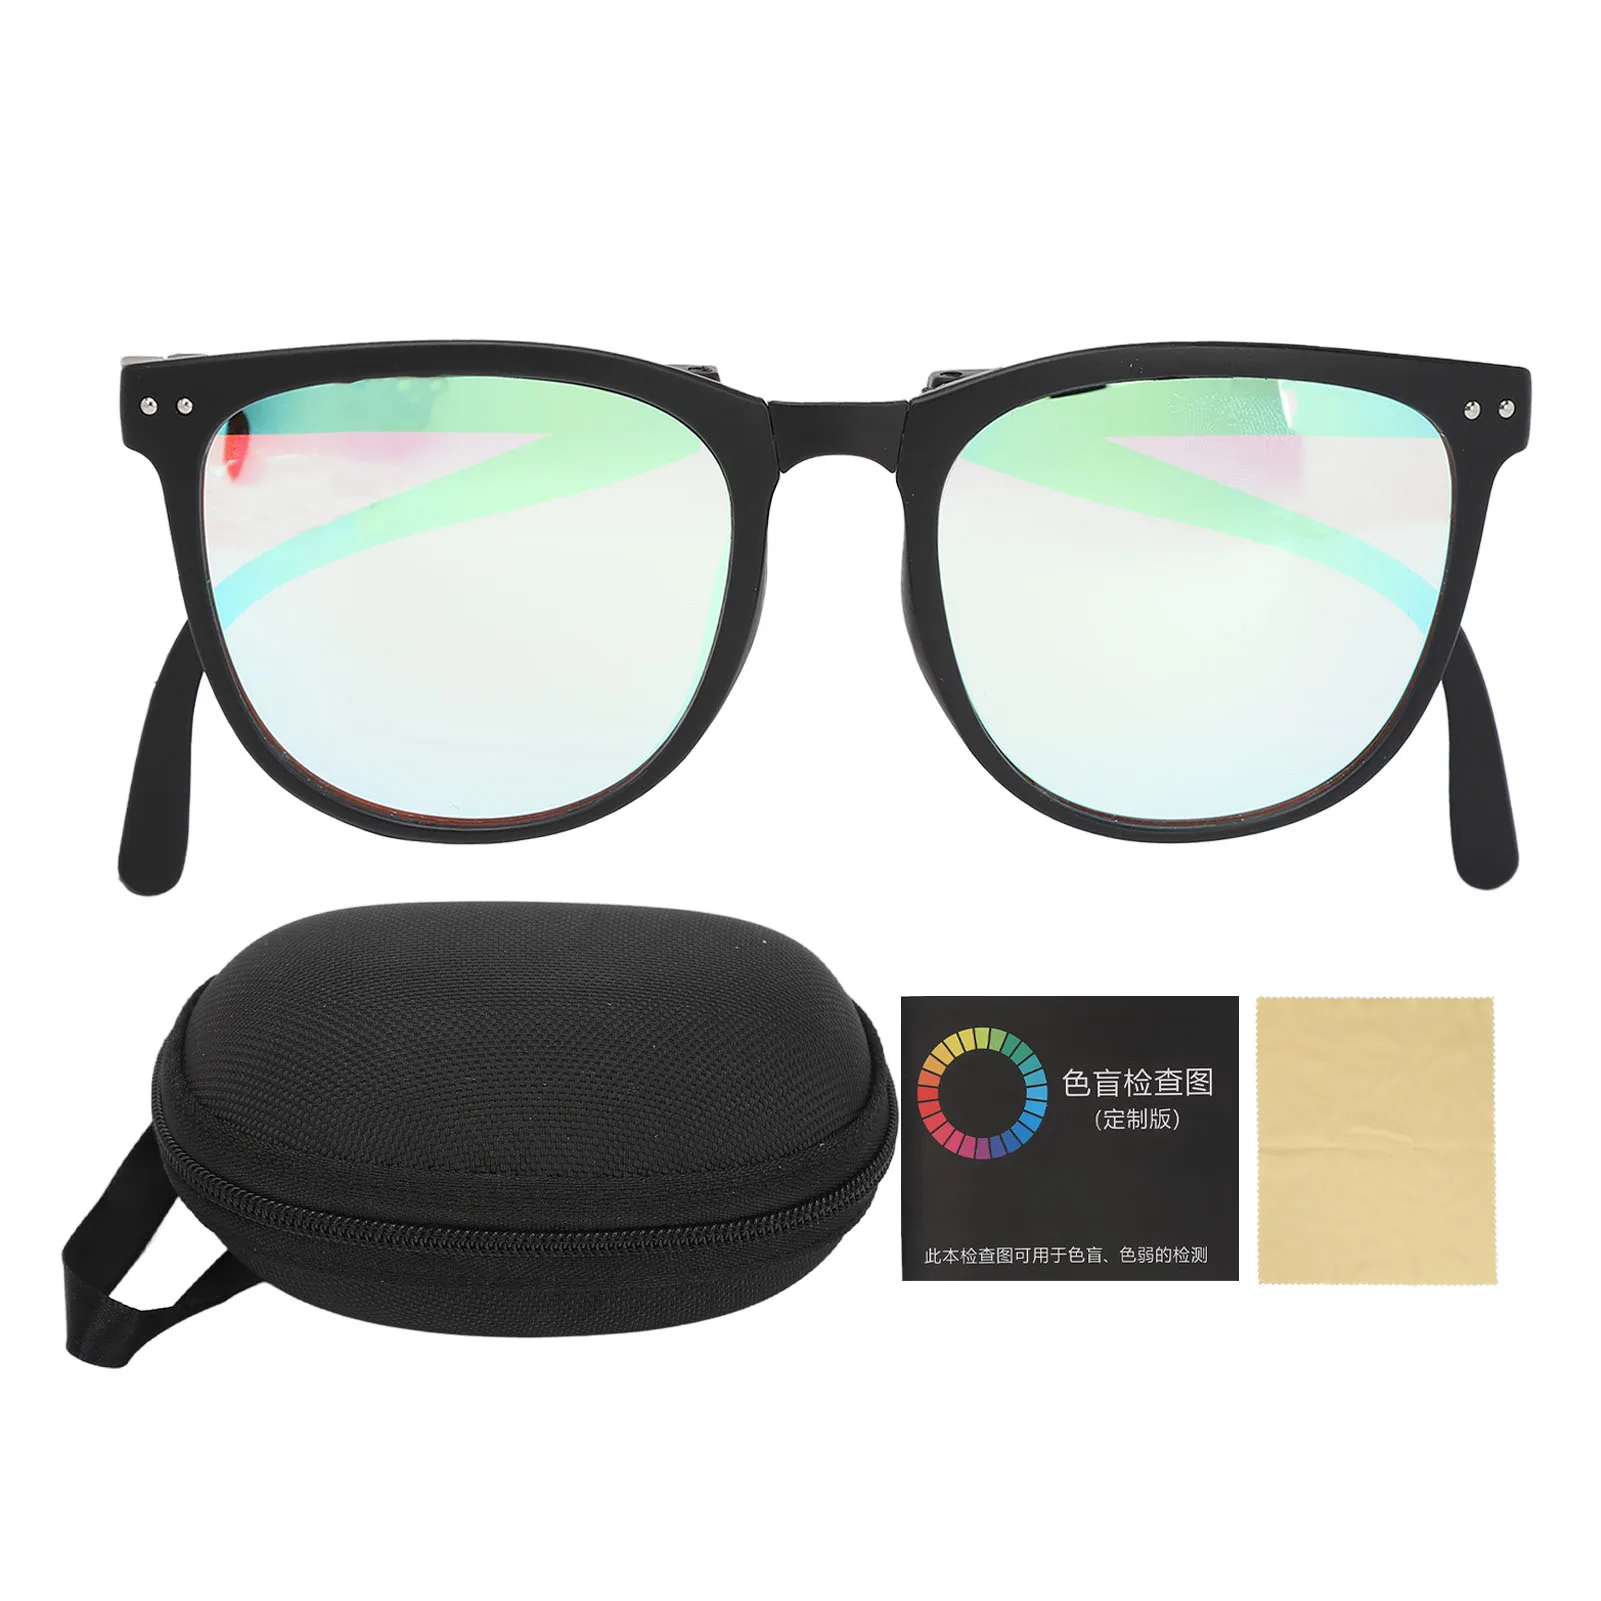 

Color Blindness Correction Glasses Red Green Color Blind Glasses for Daltonism for Watching Television